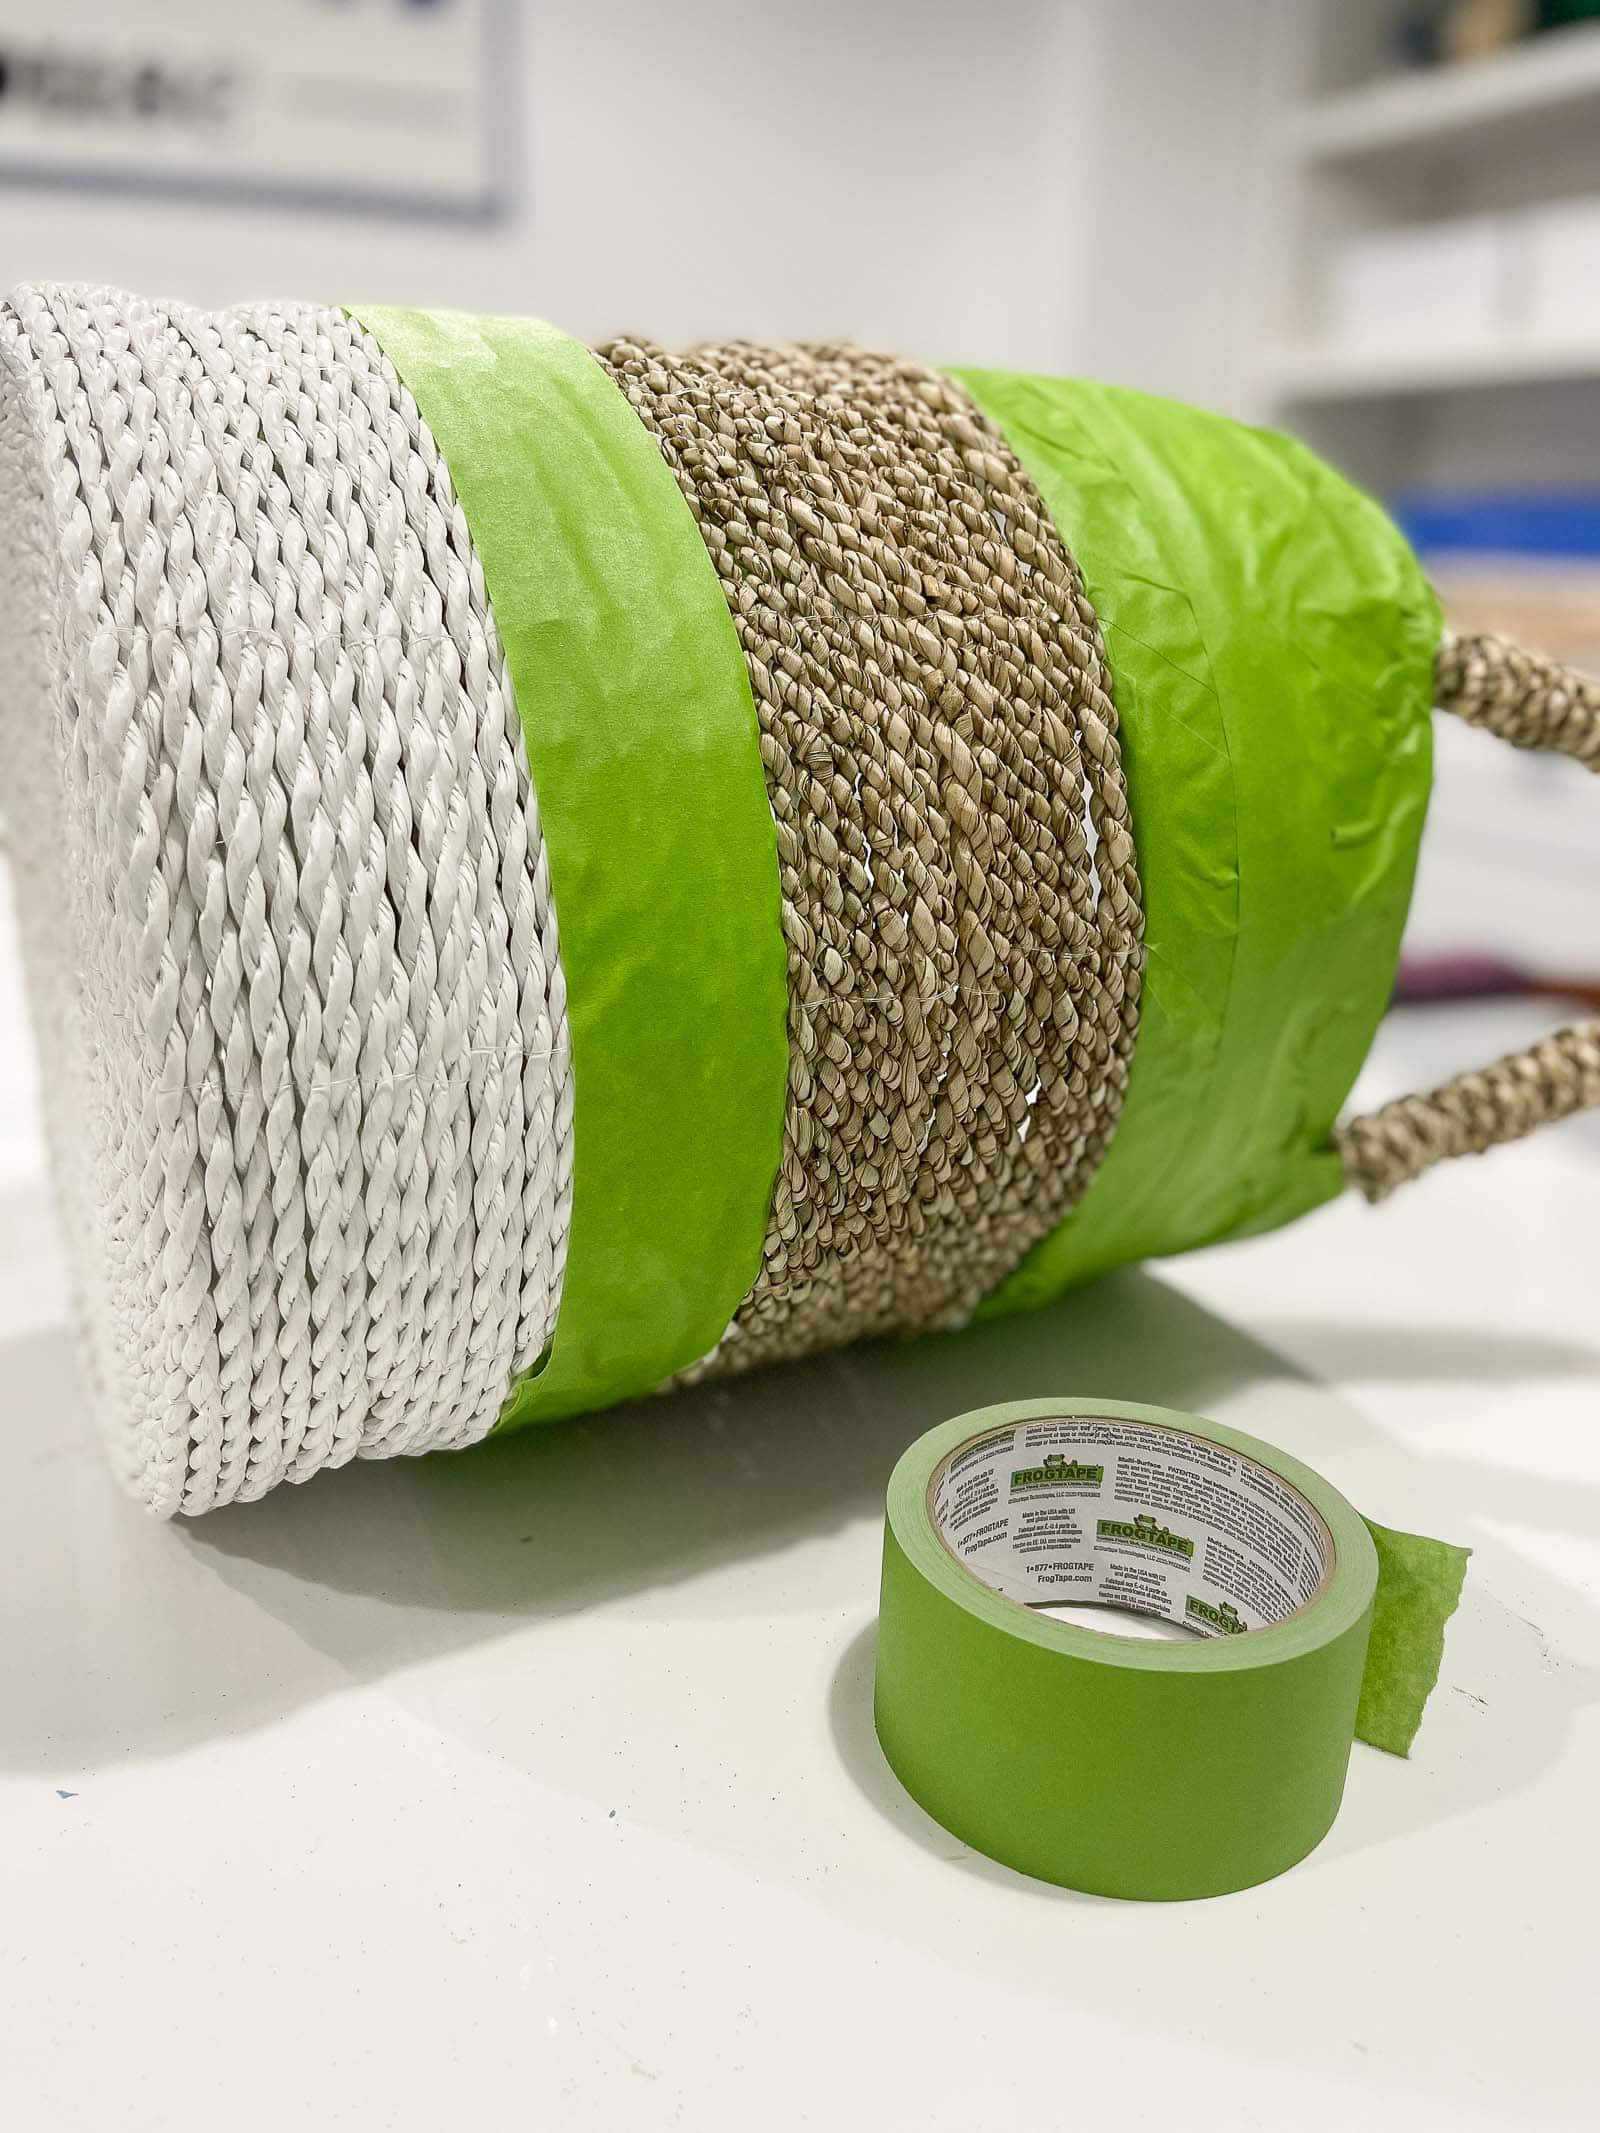 taping off striped baskets with Frogtape